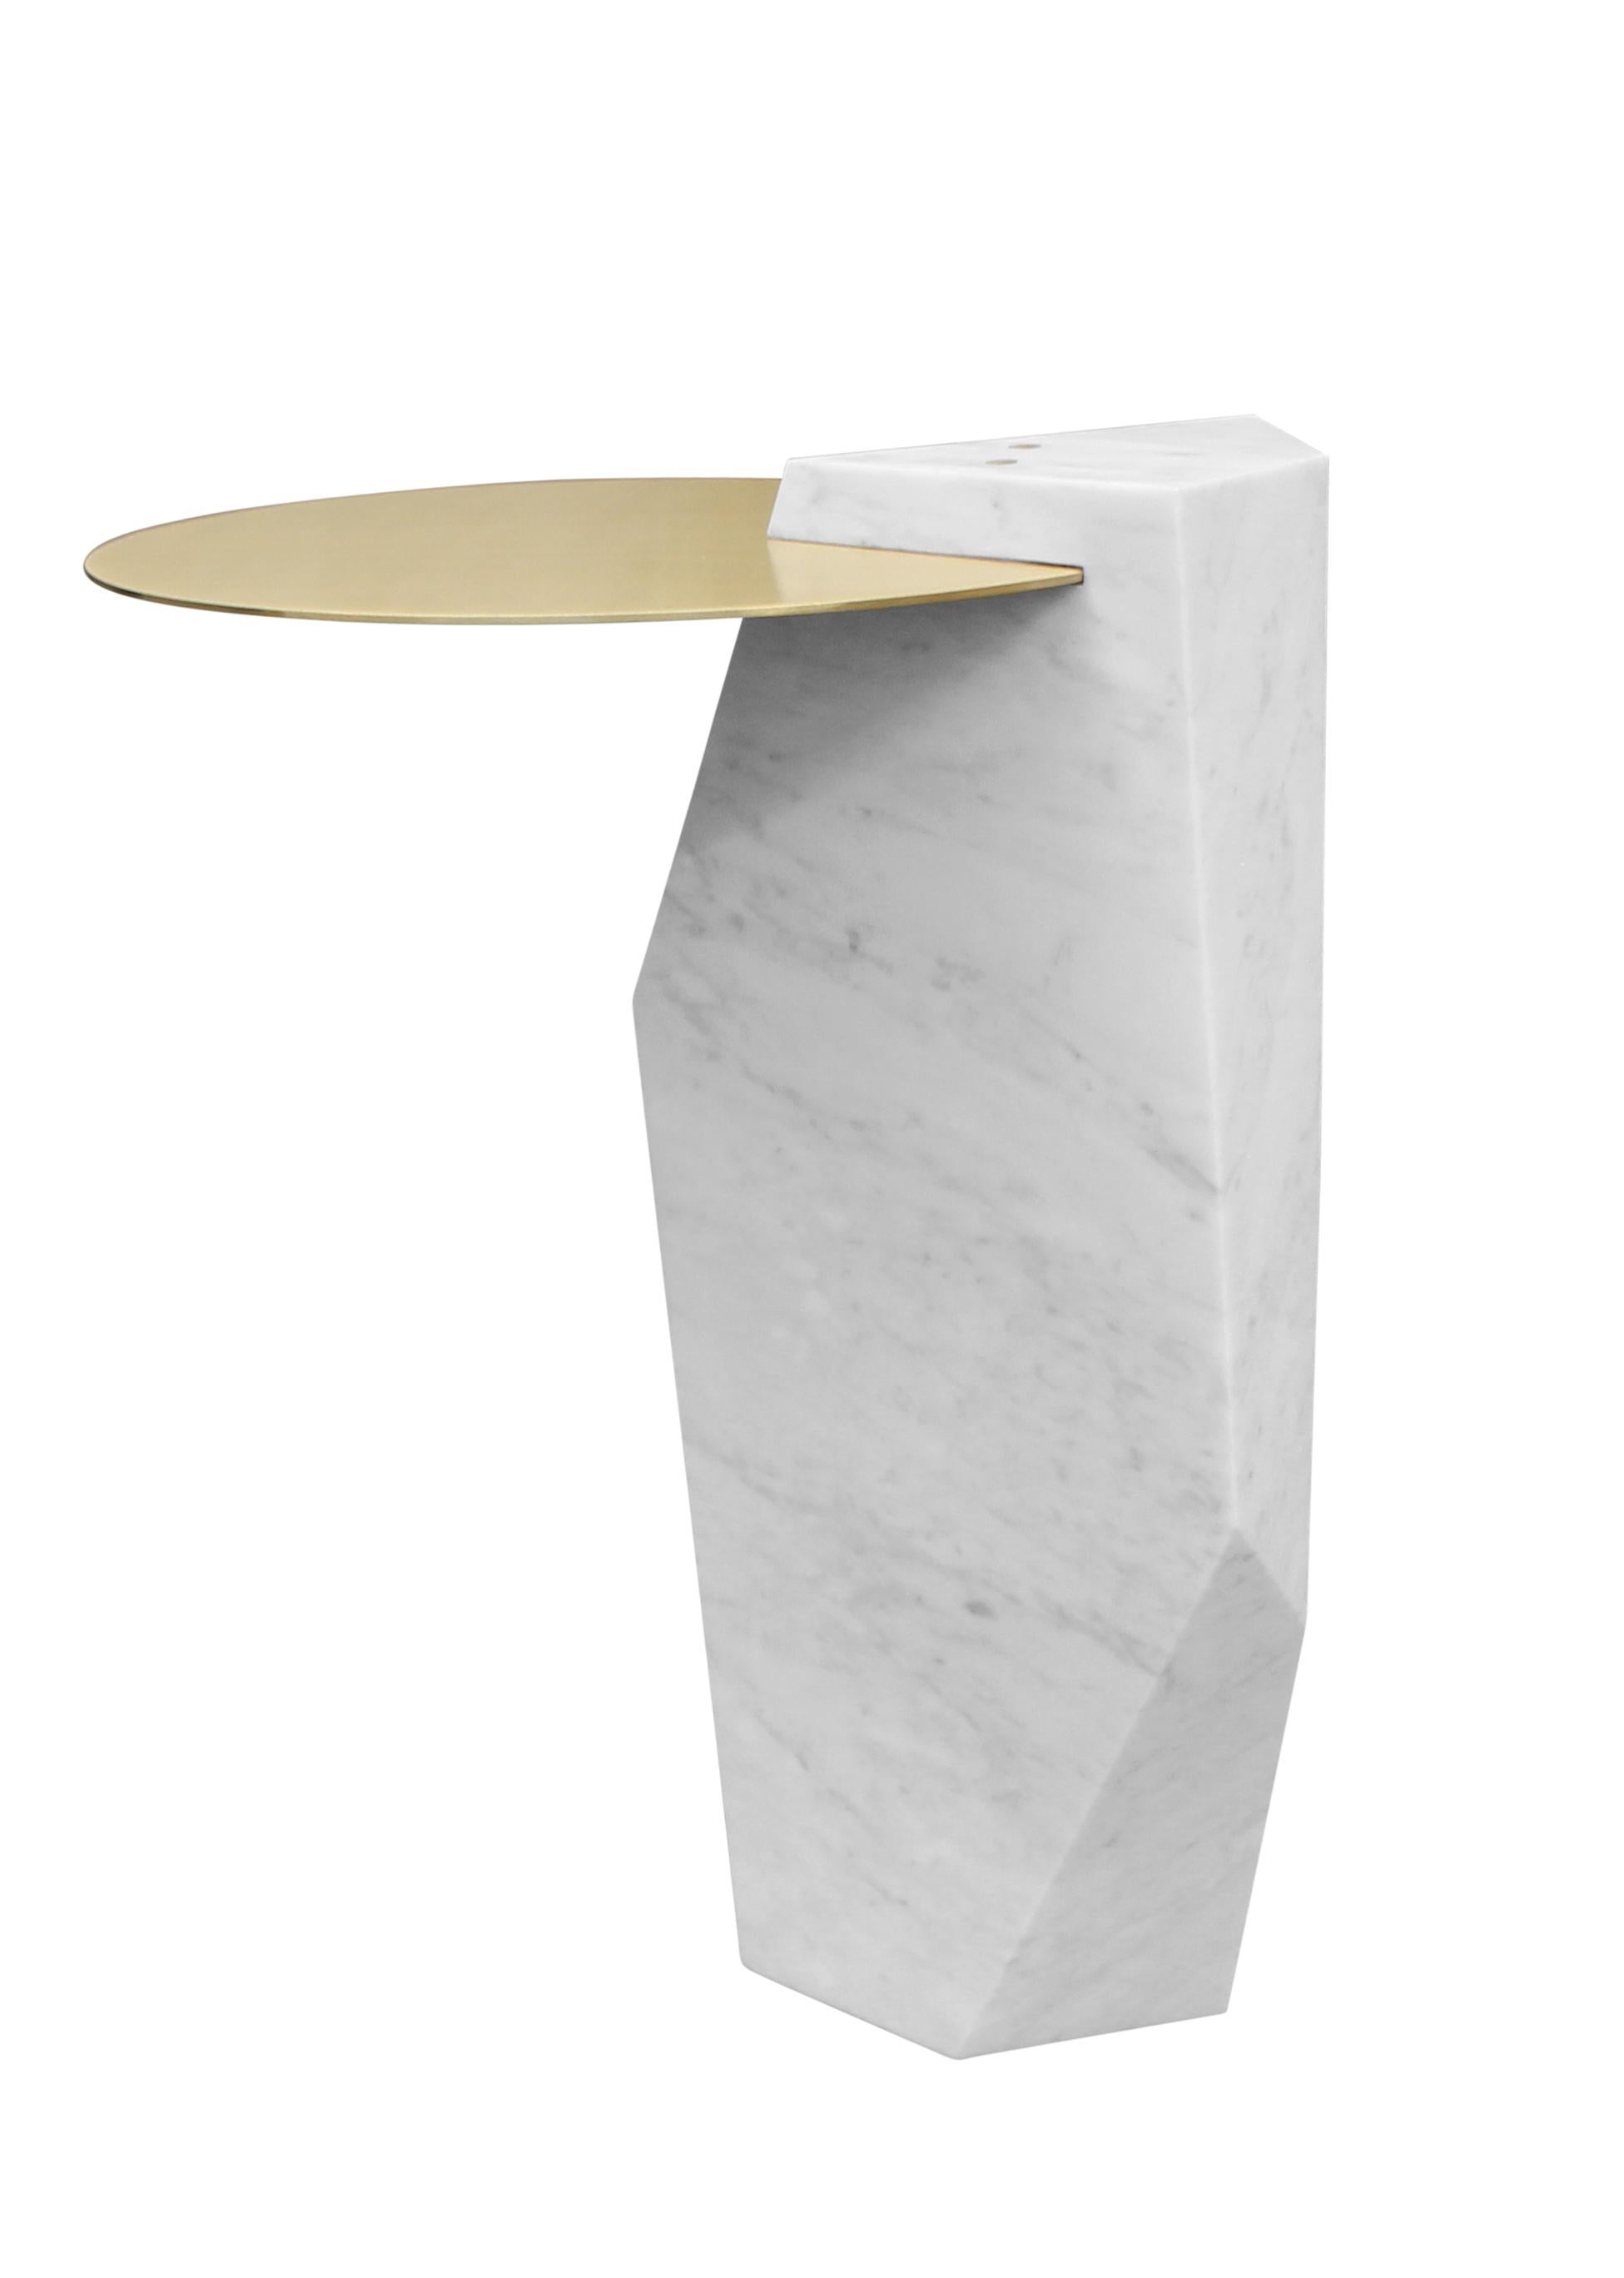 A solid block of Italian Carrara marble, carved and inset with a brass tray. Available in a variety of colored marbles and numerous metal options. Can also be made as a dining or console table.